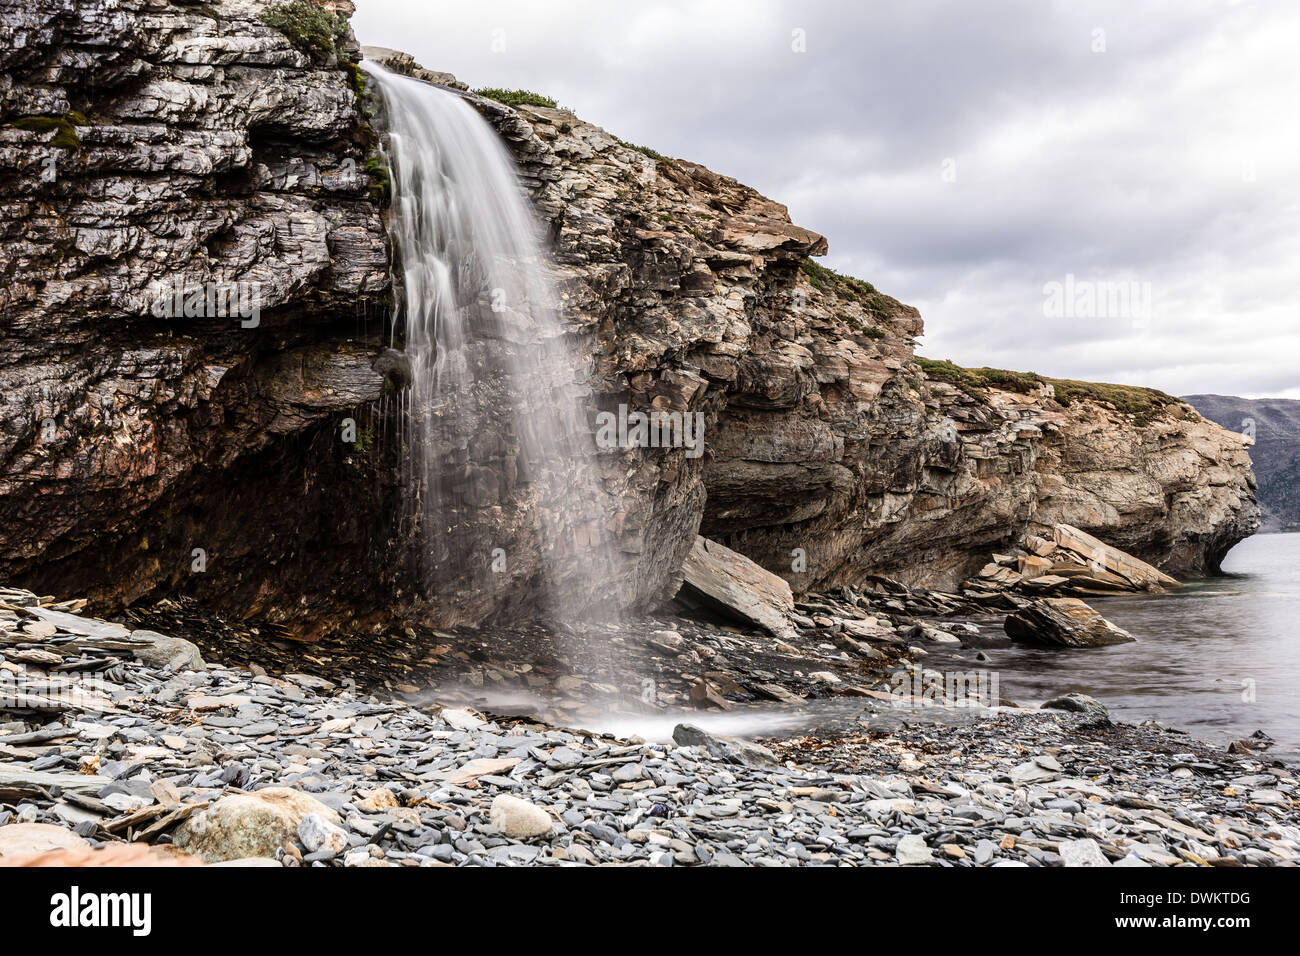 Slow shutter speed capture of a waterfall at Ramah, Labrador, Canada, North America Stock Photo